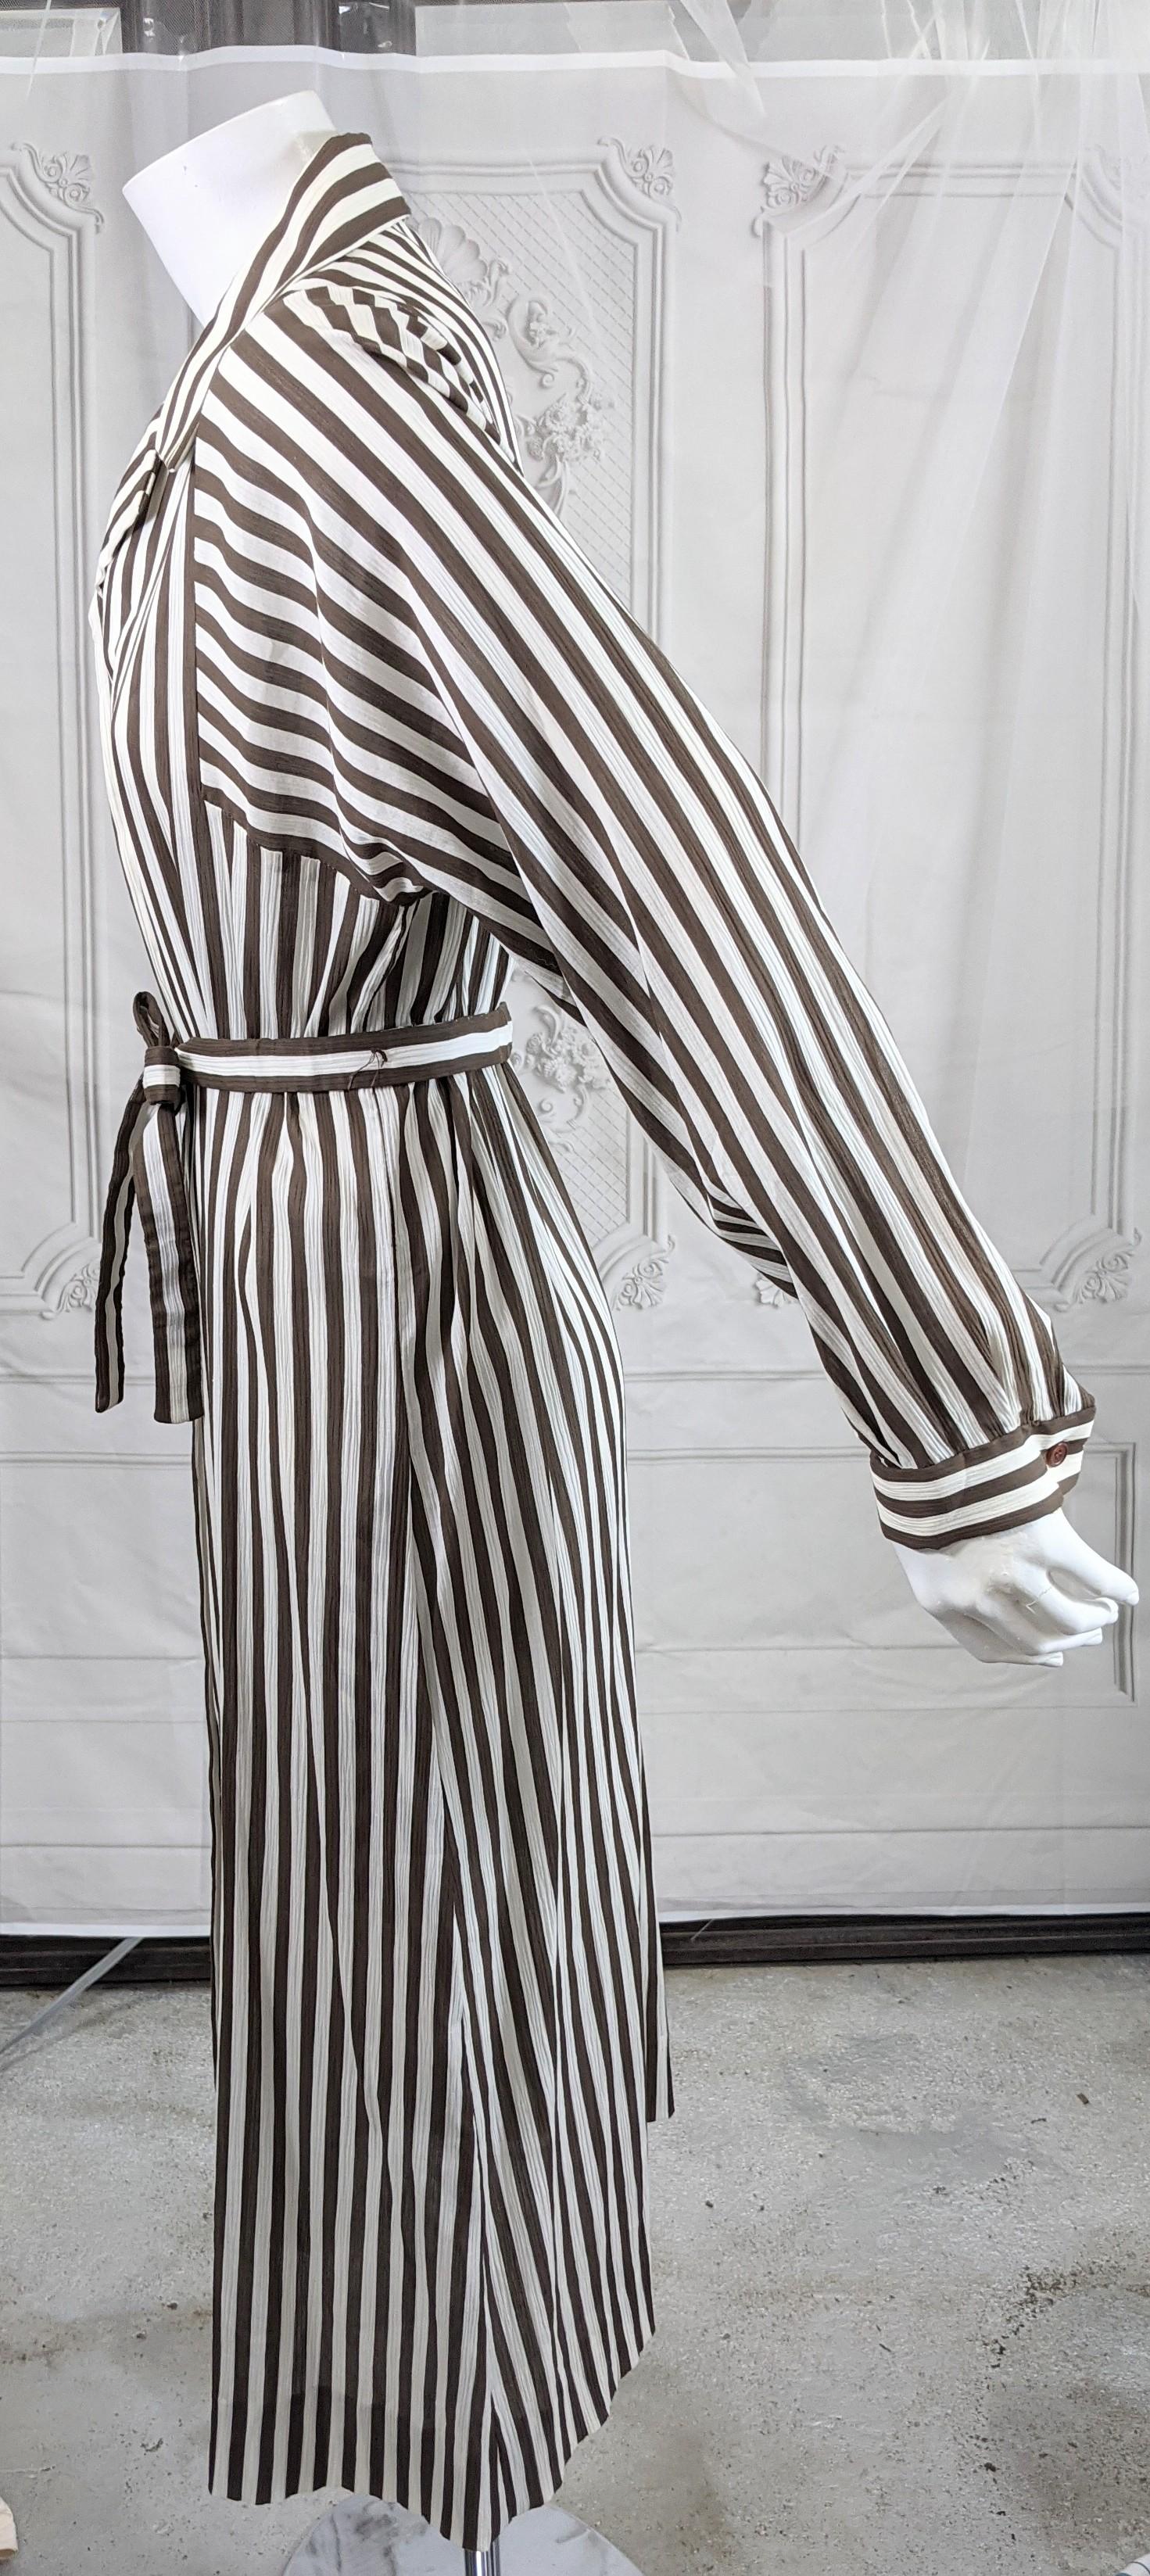 Elegant and timeless Halston Crinkle Chocolate Cotton Striped Day Dress in a shirtwaist style with self belt. Deep dolman sleeves have stripes running lengthwise.
Old stock with additional buttons. Lightweight cotton, with dyed mother of pearl